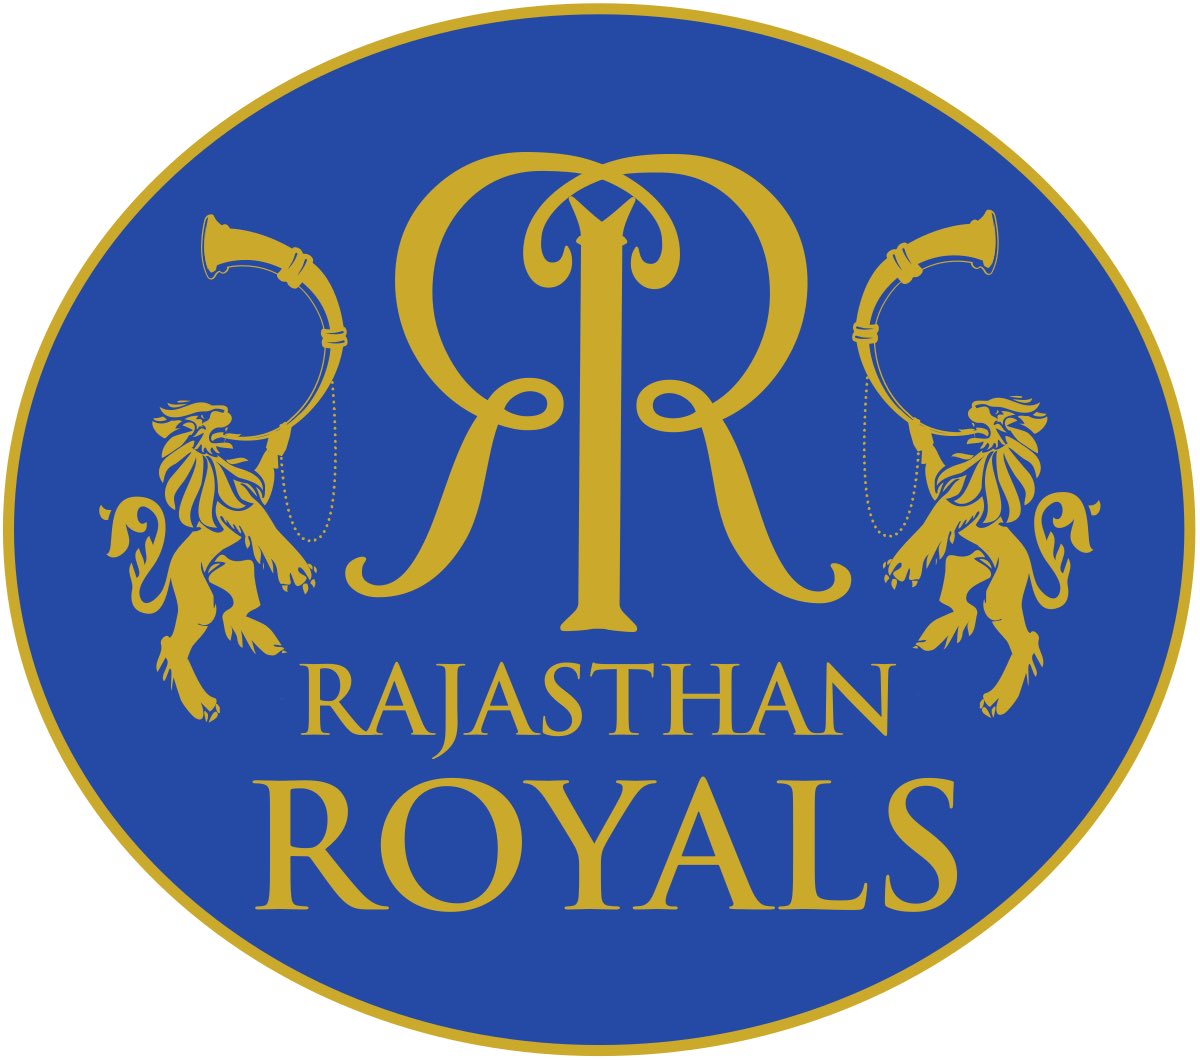 Rajasthan Royals  Newcastle UnitedOnly at the top at the league’s inception. They’ve had all-time greats once play for them, but haven’t had the quality to keep them at the top. They possess players with talent, but only a few shining lights.